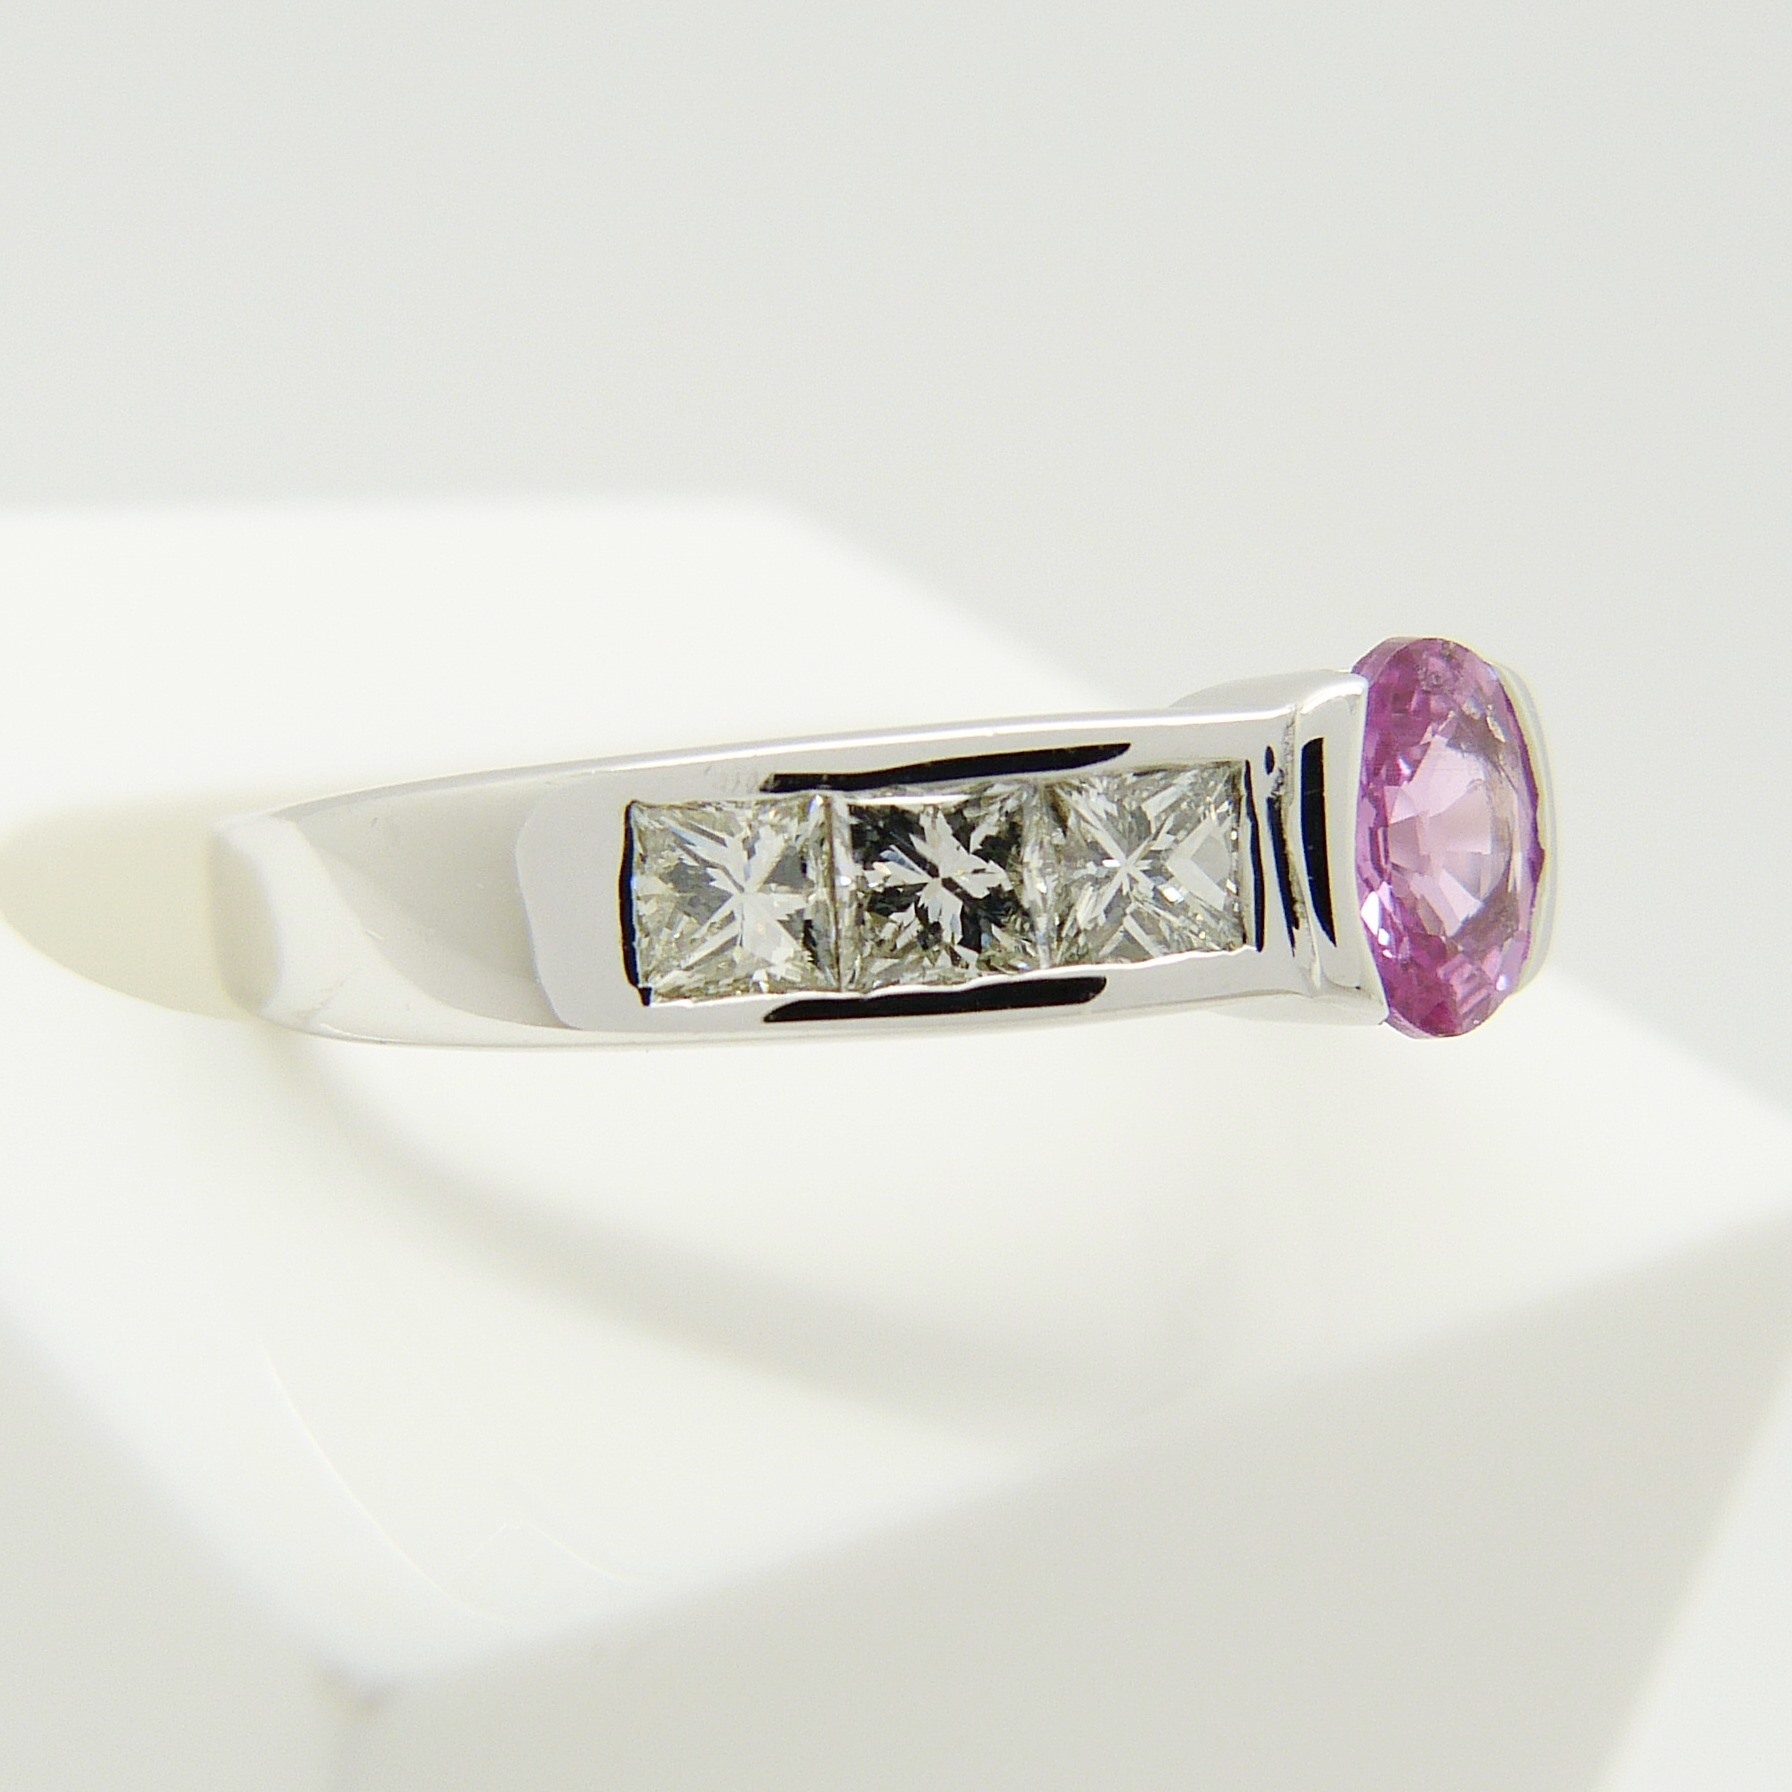 A pink Sapphire gemstone and princess-cut Diamond ring in 18ct white Gold - Image 3 of 7